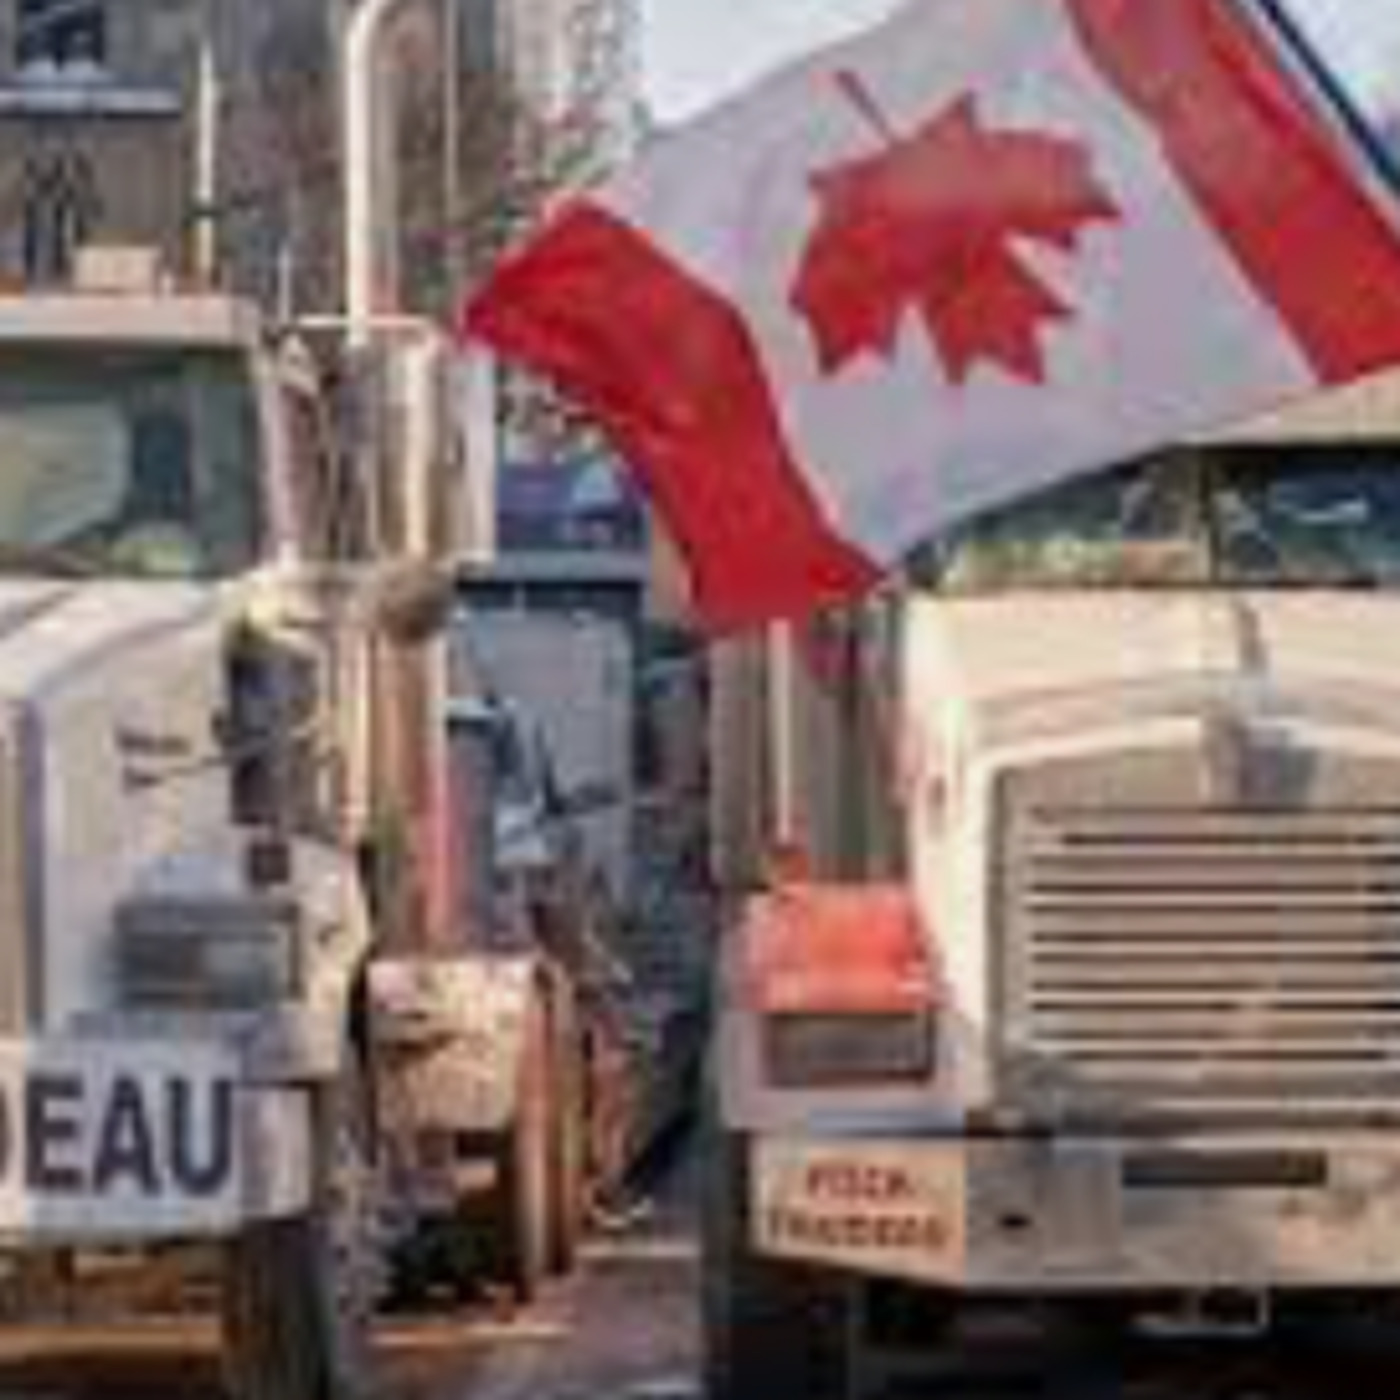 Episode 778: BREAKING NEWS: Trudeau VS Truckers Convoy For Freedom